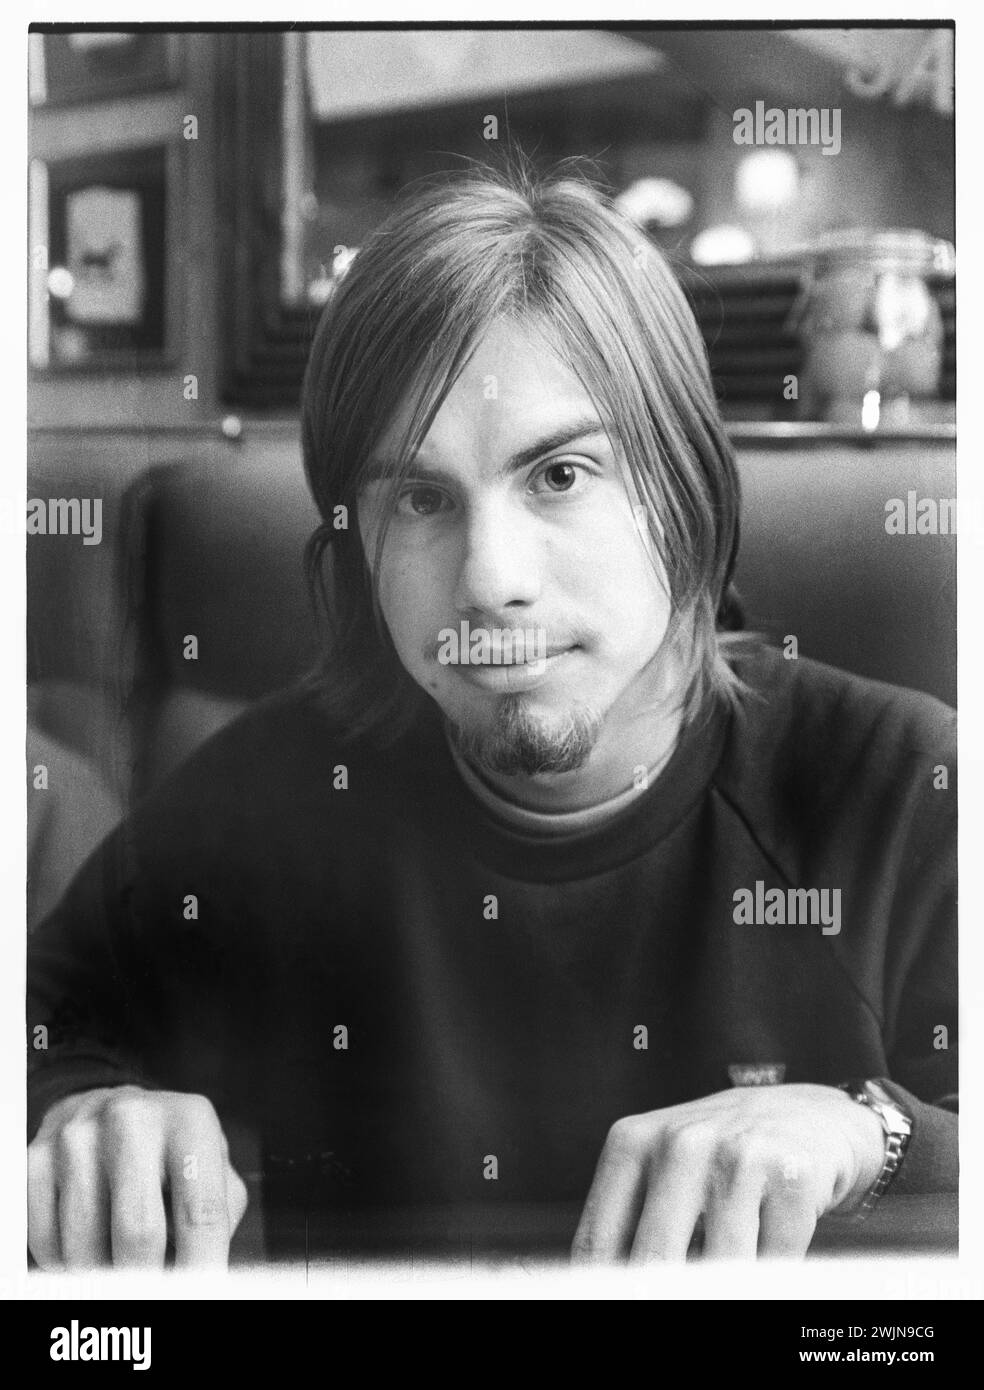 BENGT LAGERBERG, PORTRAIT, 1996: A portrait of Swedish drummer Bengt Lagerberg of the Cardigans at Al Bacio Italian Restaurant in Bristol, England , UK on 9 November 1996. Photo: Rob Watkins.  INFO: The Cardigans, a Swedish band formed in the early '90s, gained international fame with hits like 'Lovefool.' Their eclectic sound merges pop, rock, and indie elements, marked by Nina Persson's distinctive vocals and a penchant for catchy melodies Stock Photo